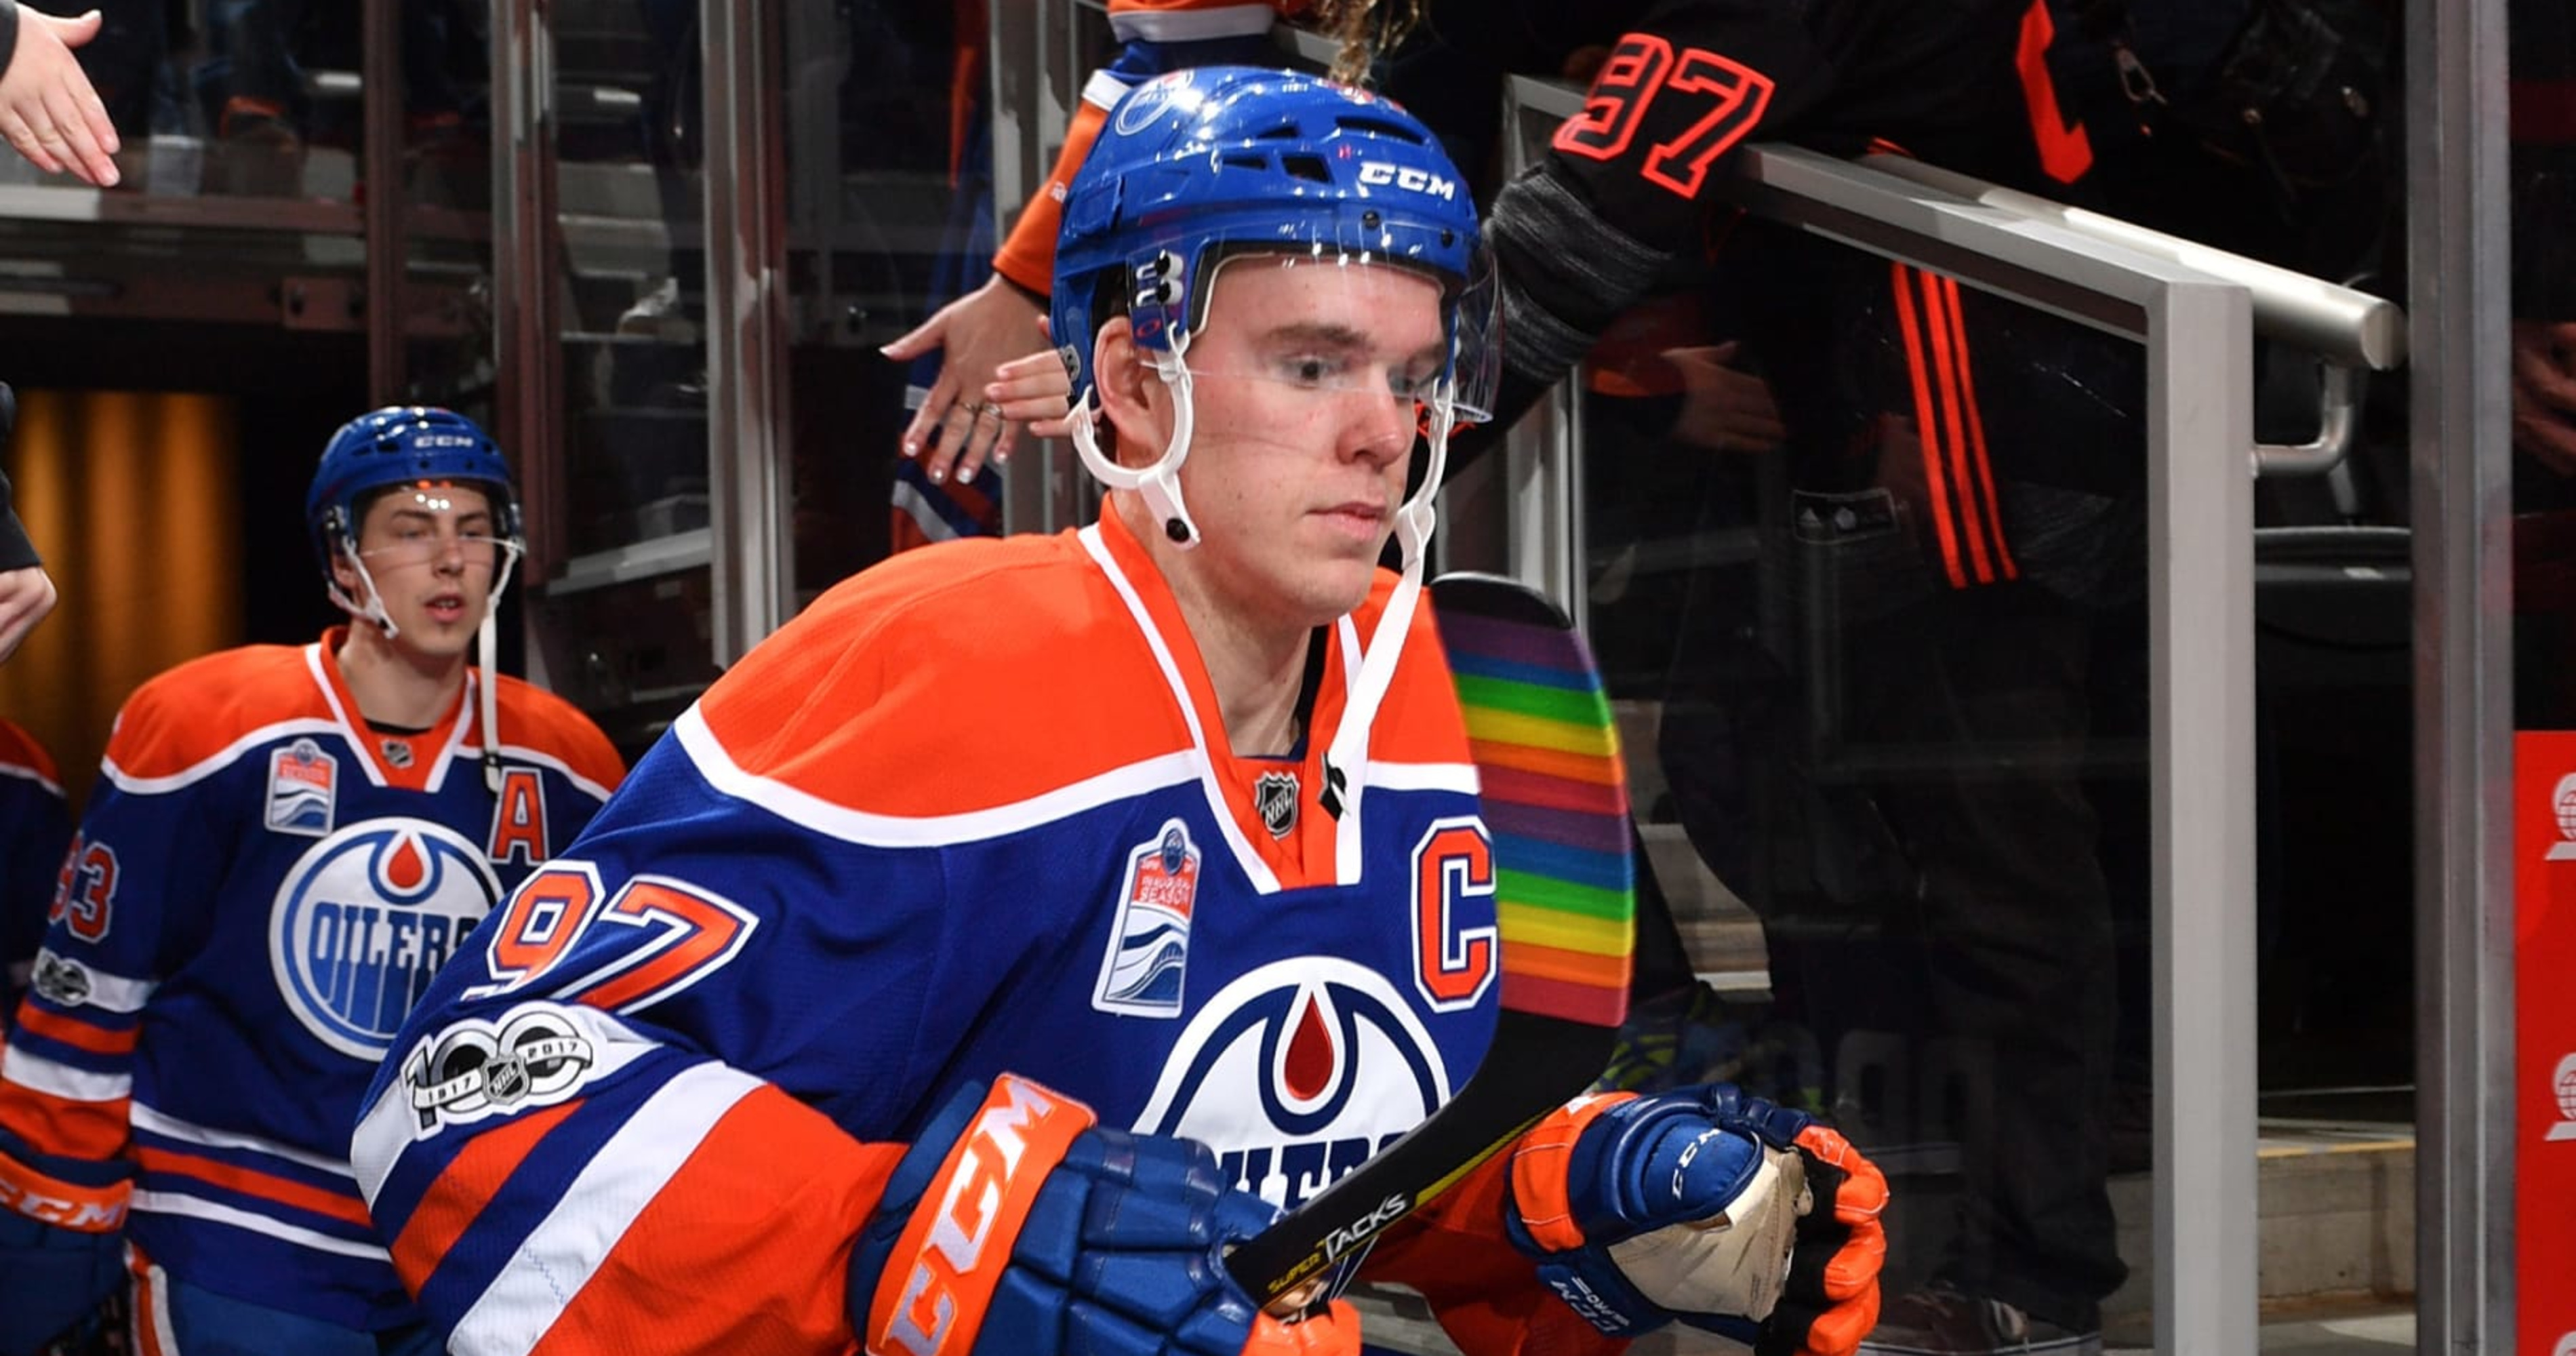 NHL Teams Will No Longer Wear Pride Jerseys: 'It's Become a Distraction